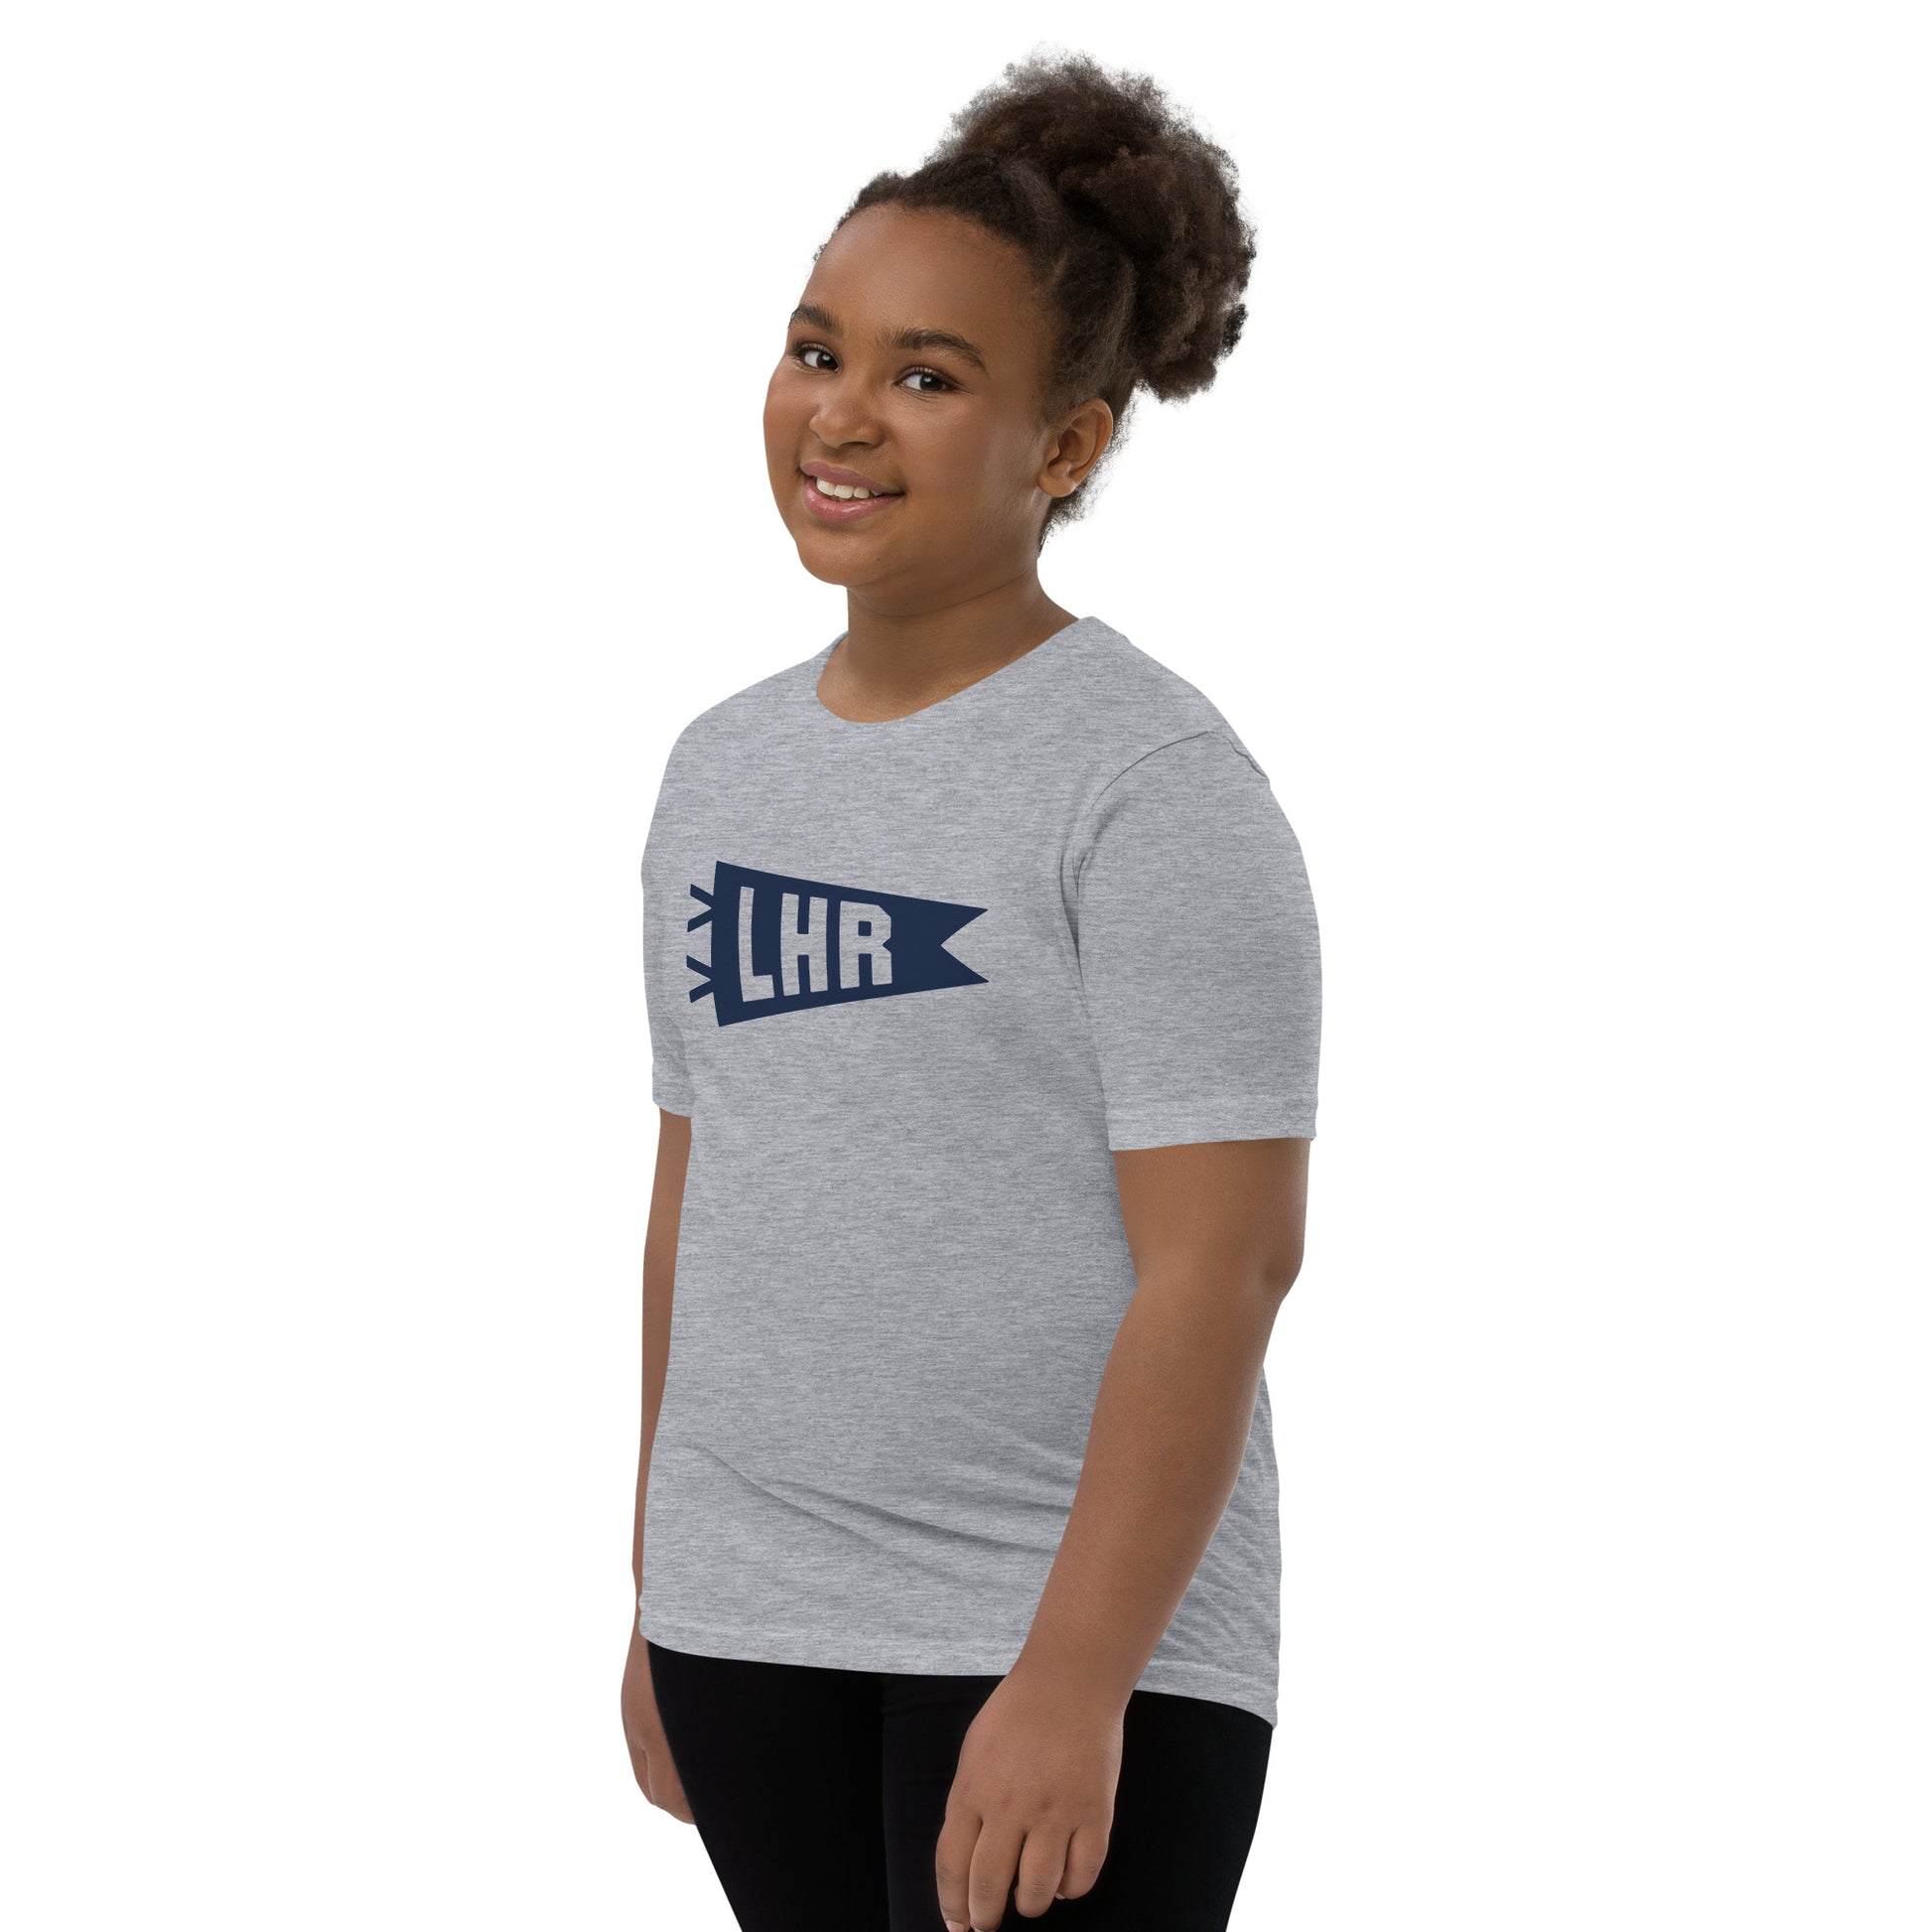 Kid's Airport Code Tee - Navy Blue Graphic • LHR London • YHM Designs - Image 04